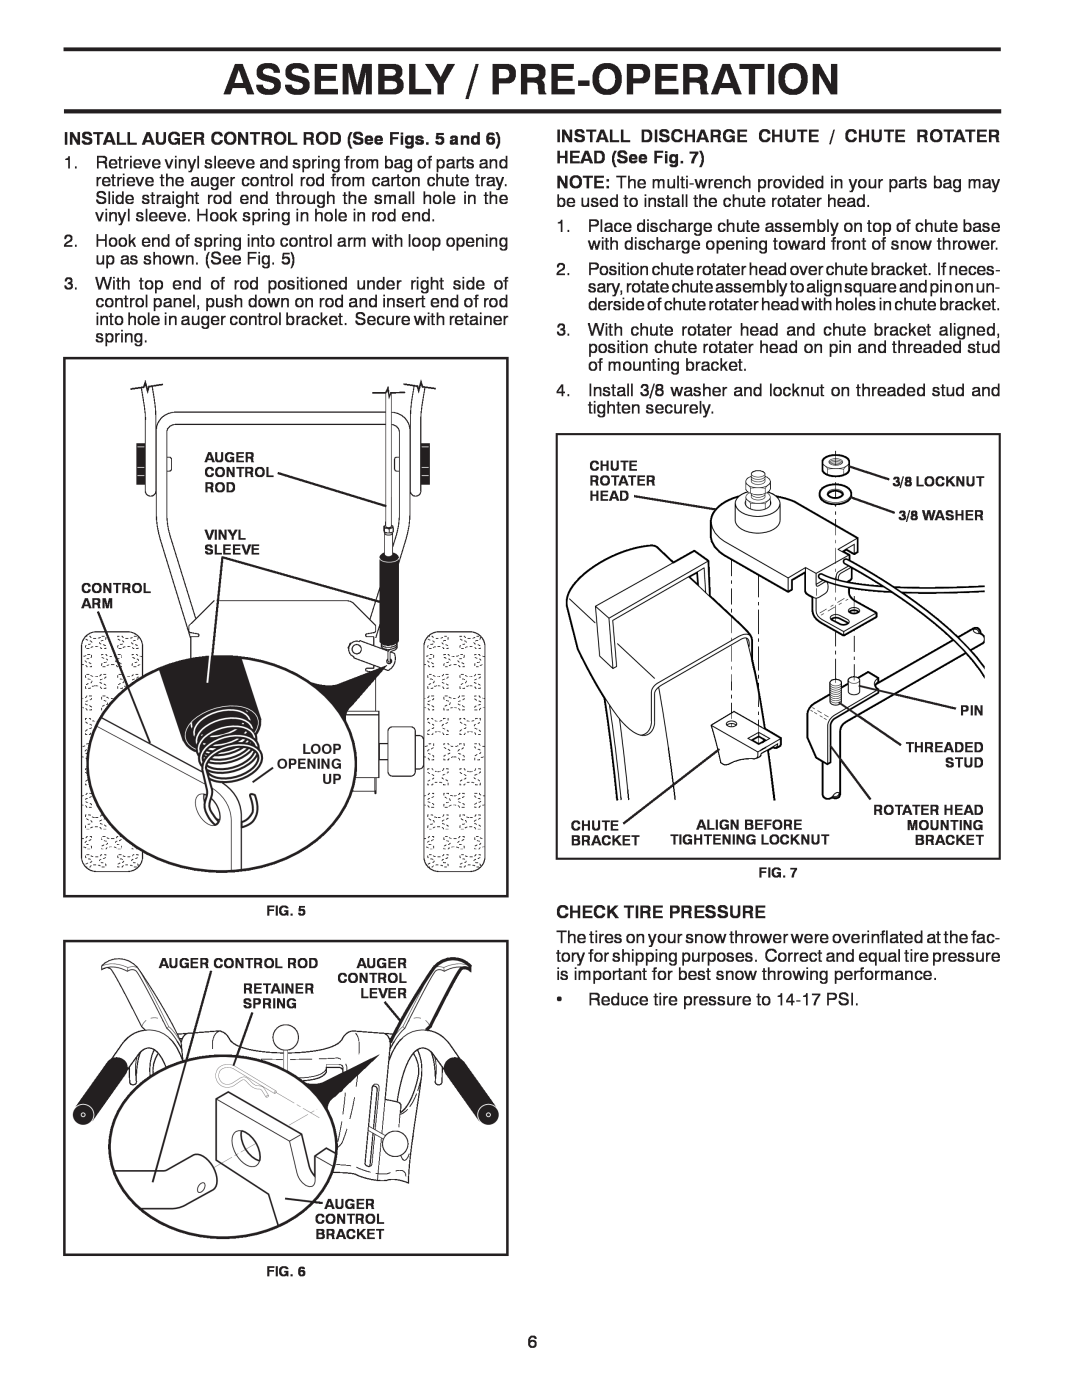 McCulloch 96192004101 owner manual Assembly / Pre-Operation, INSTALL AUGER CONTROL ROD See Figs. 5 and, Check Tire Pressure 